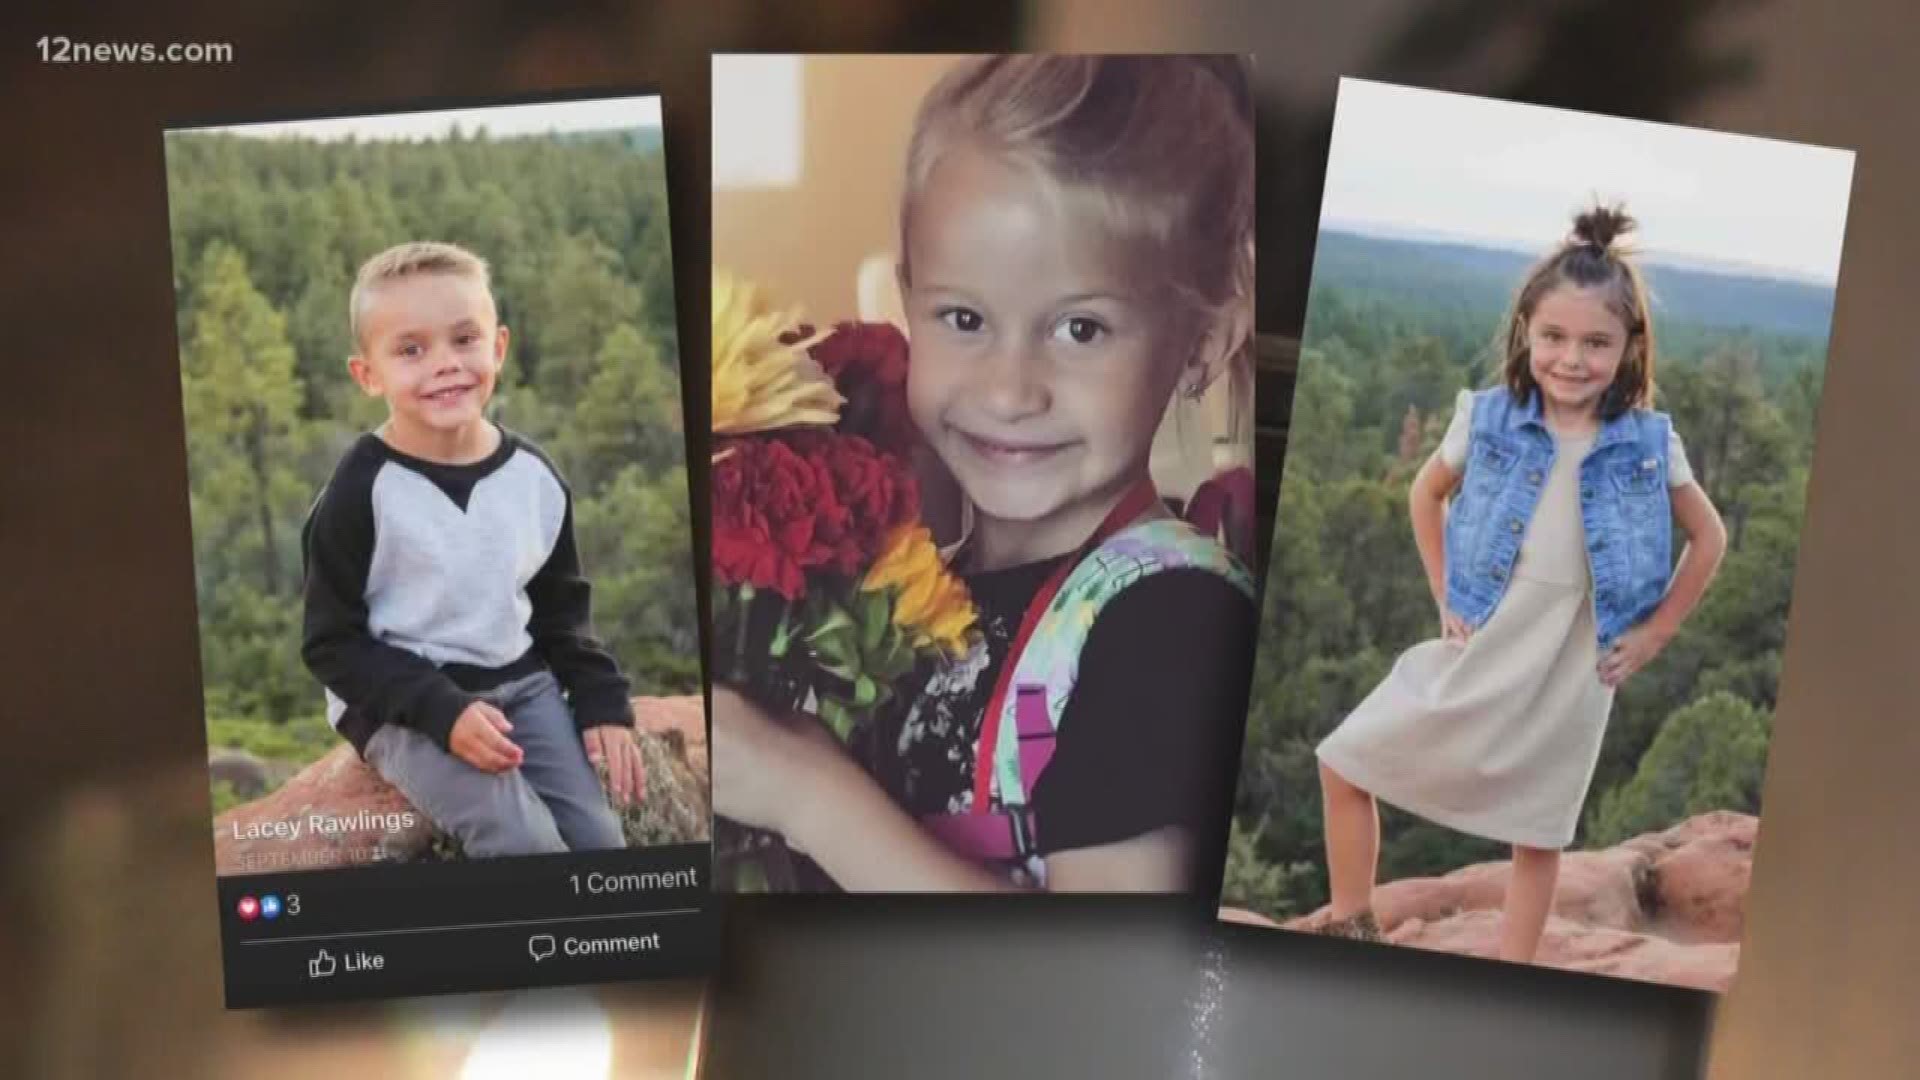 The parents of the children who died in Tonto Basin late last year after being swept away by floodwaters are facing manslaughter, child abuse charges.